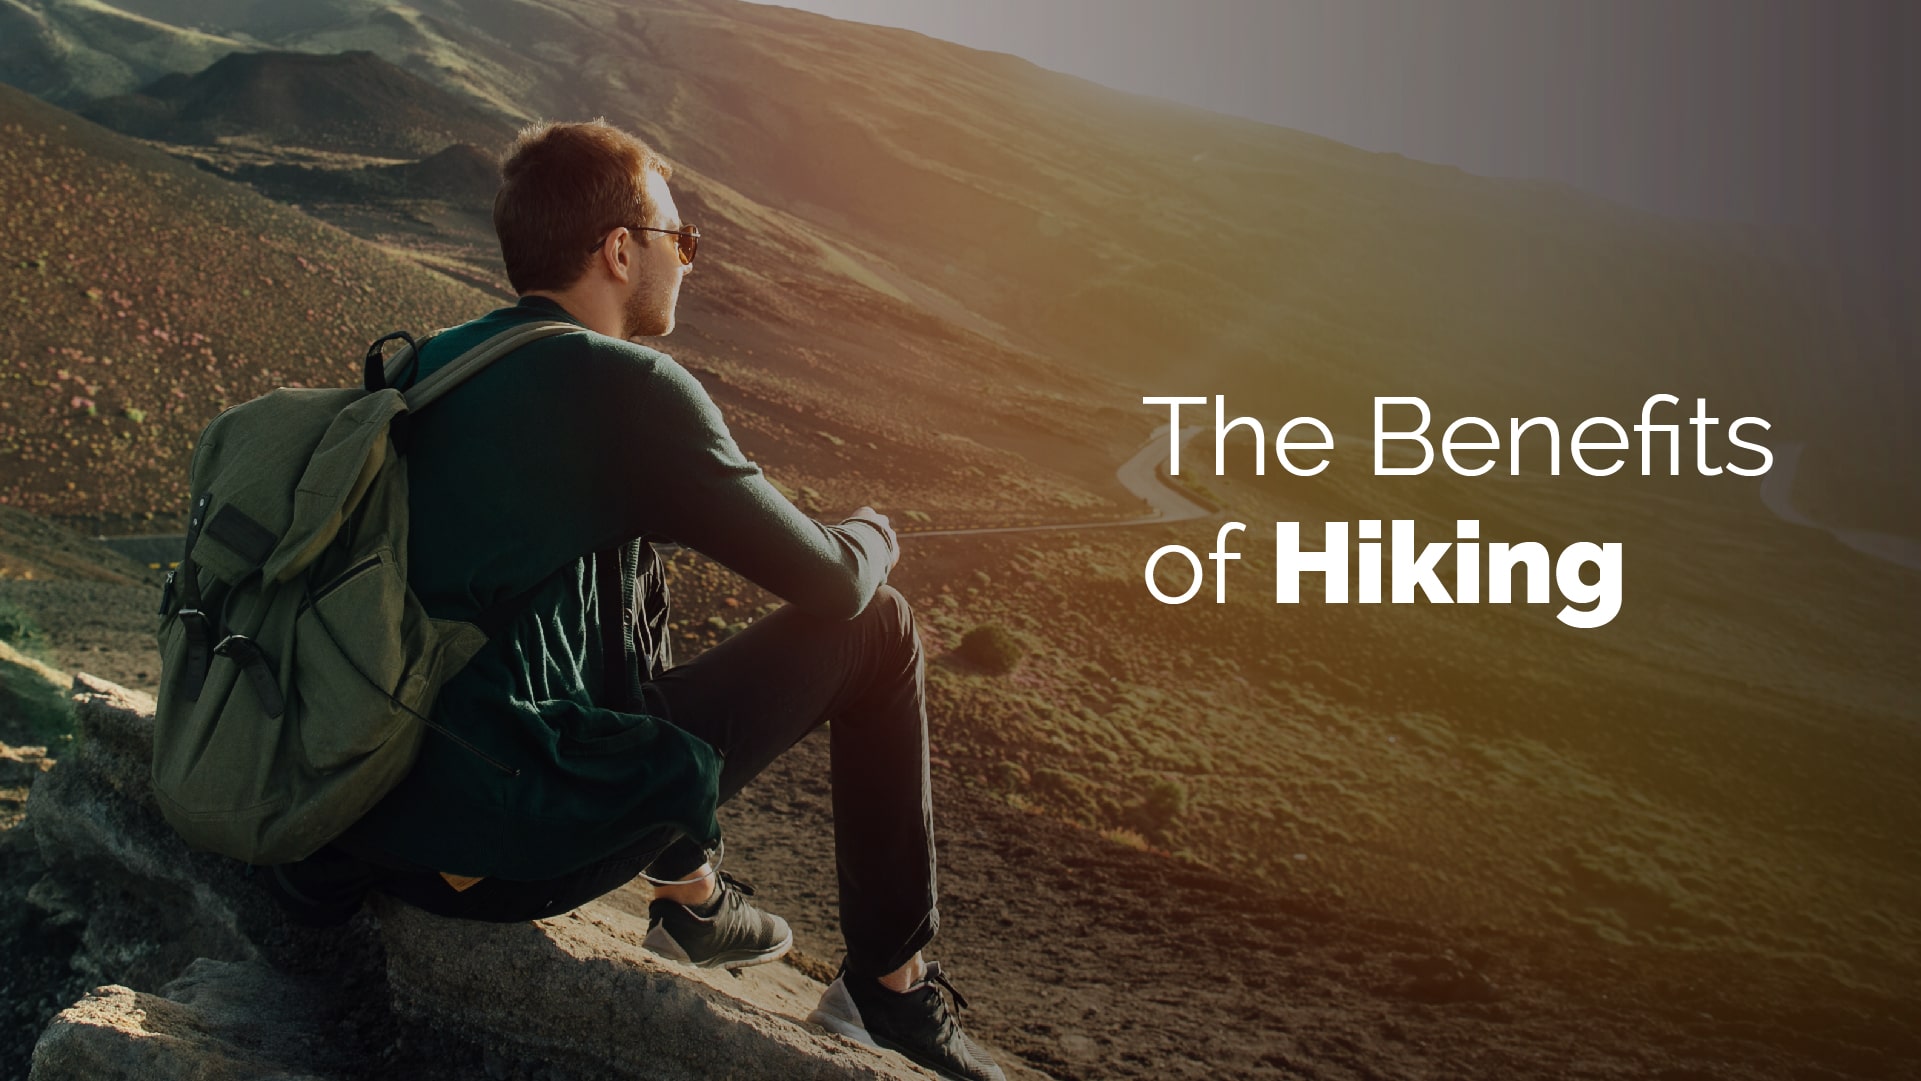 The Benefits of Hiking